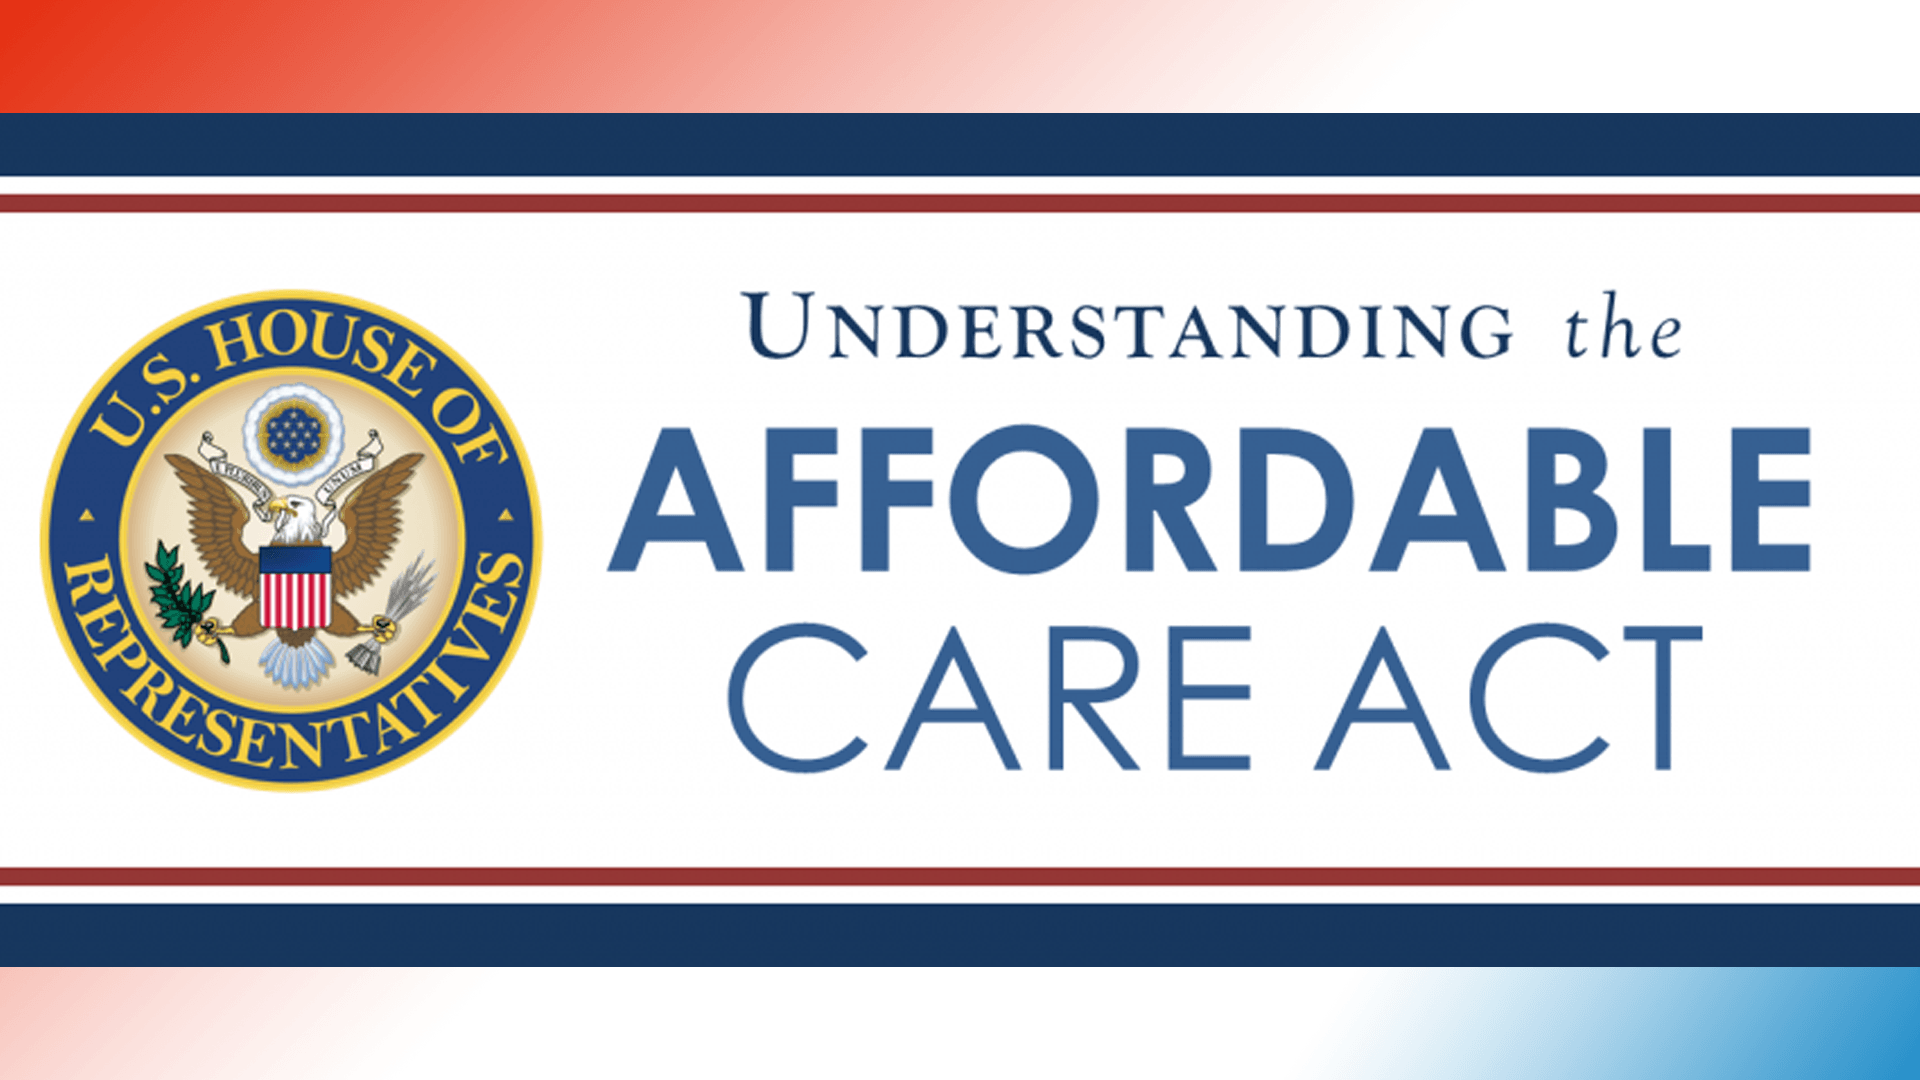 Affordable Care Act. Affordable Care Act logo. Cares Act. The affordable Company. State act